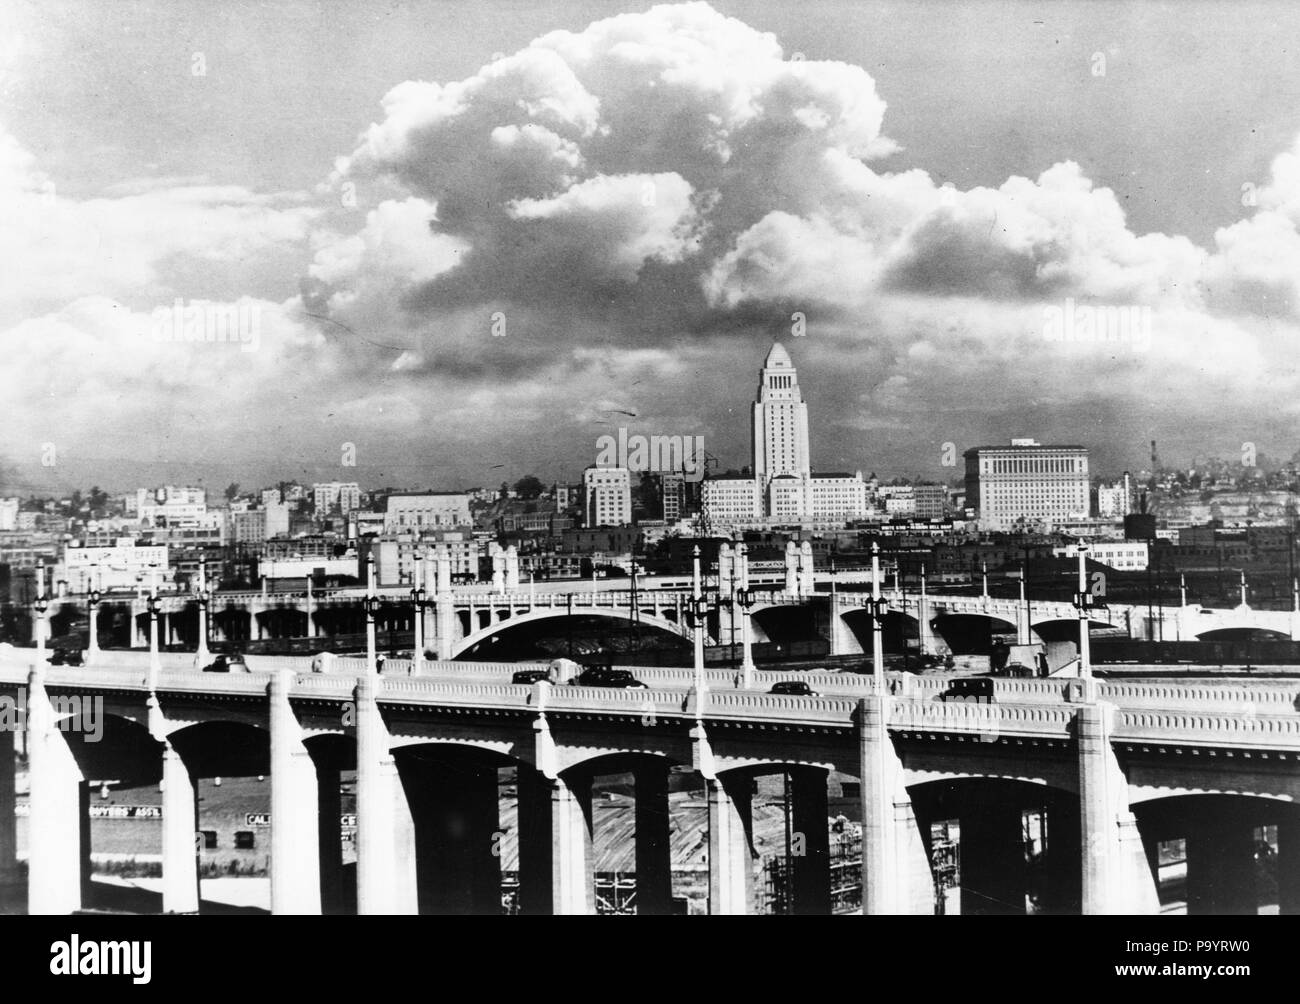 1930s SKYLINE WITH LOS ANGELES BRIDGE IN FOREGROUND LOS ANGELES CALIFORNIA USA - b100 696 ASP001 HARS OLD FASHIONED Stock Photo